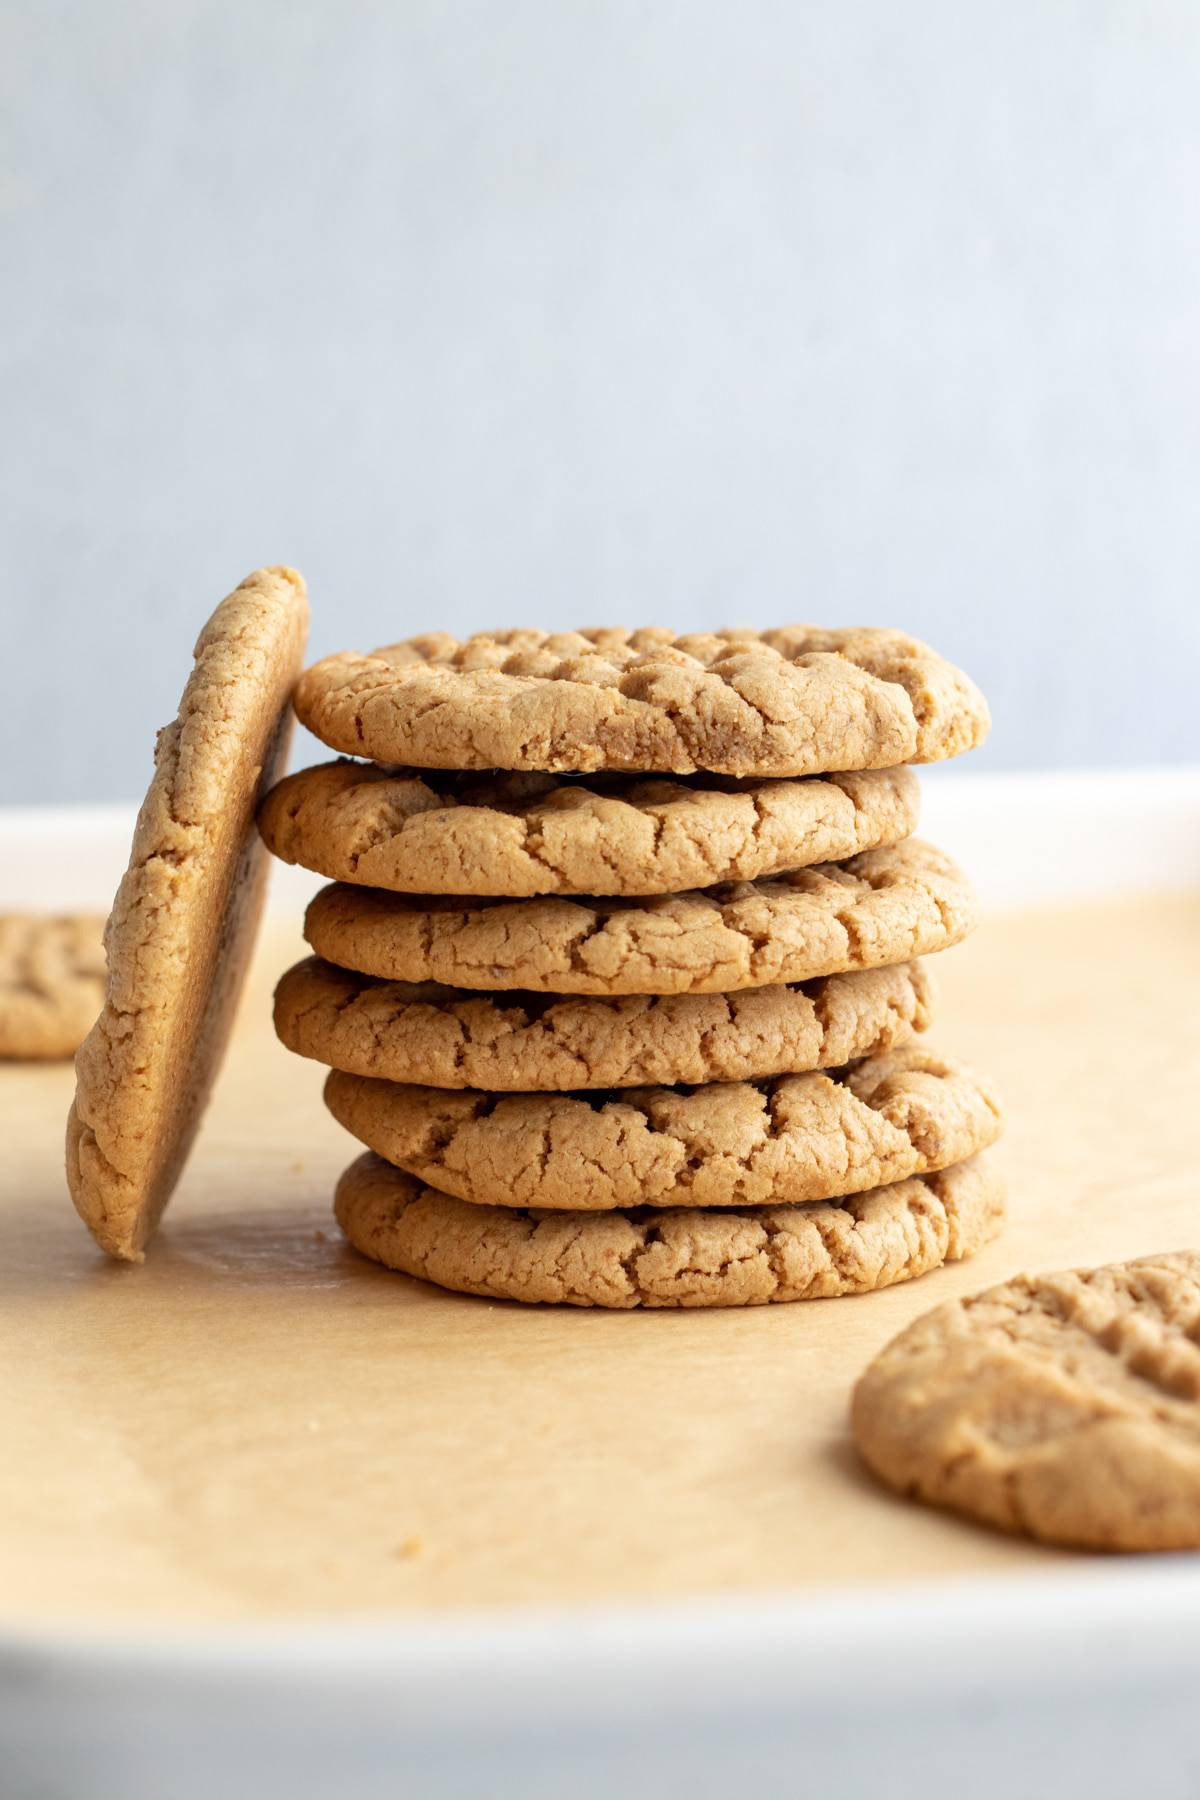 a stack of 6 peanut butter cookies with one cookie leaning against the stack.